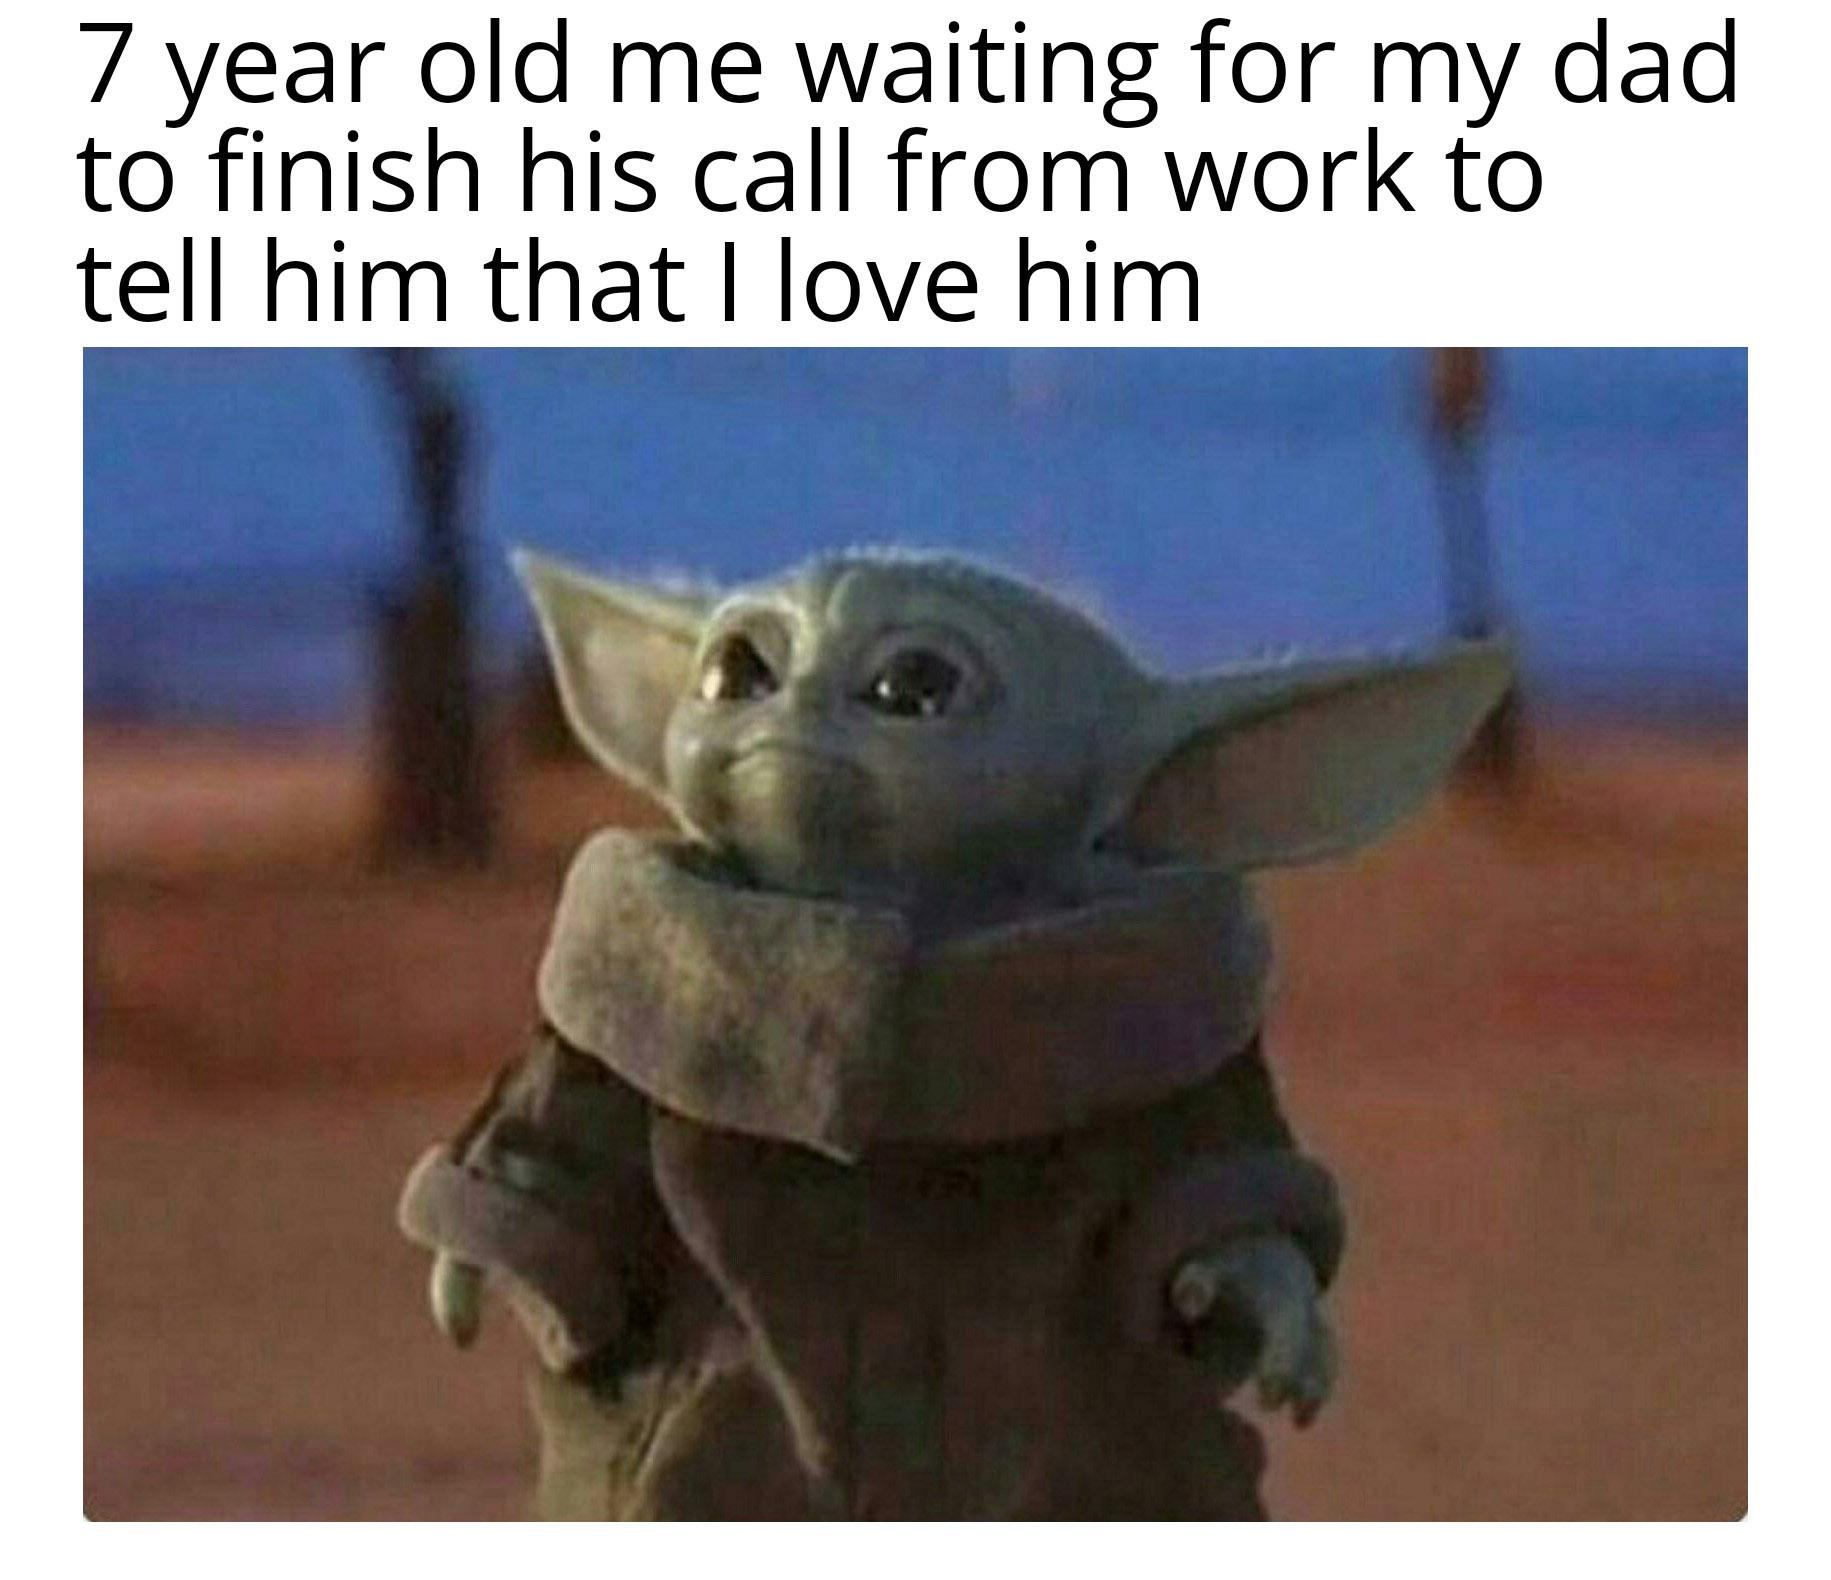 Wholesome Meme, Cute, Baby Yoda, Dad, Son, Love wholesome-memes cute text: 7 year old me waiting for my dad to finish his call from work to tell him that I love him 